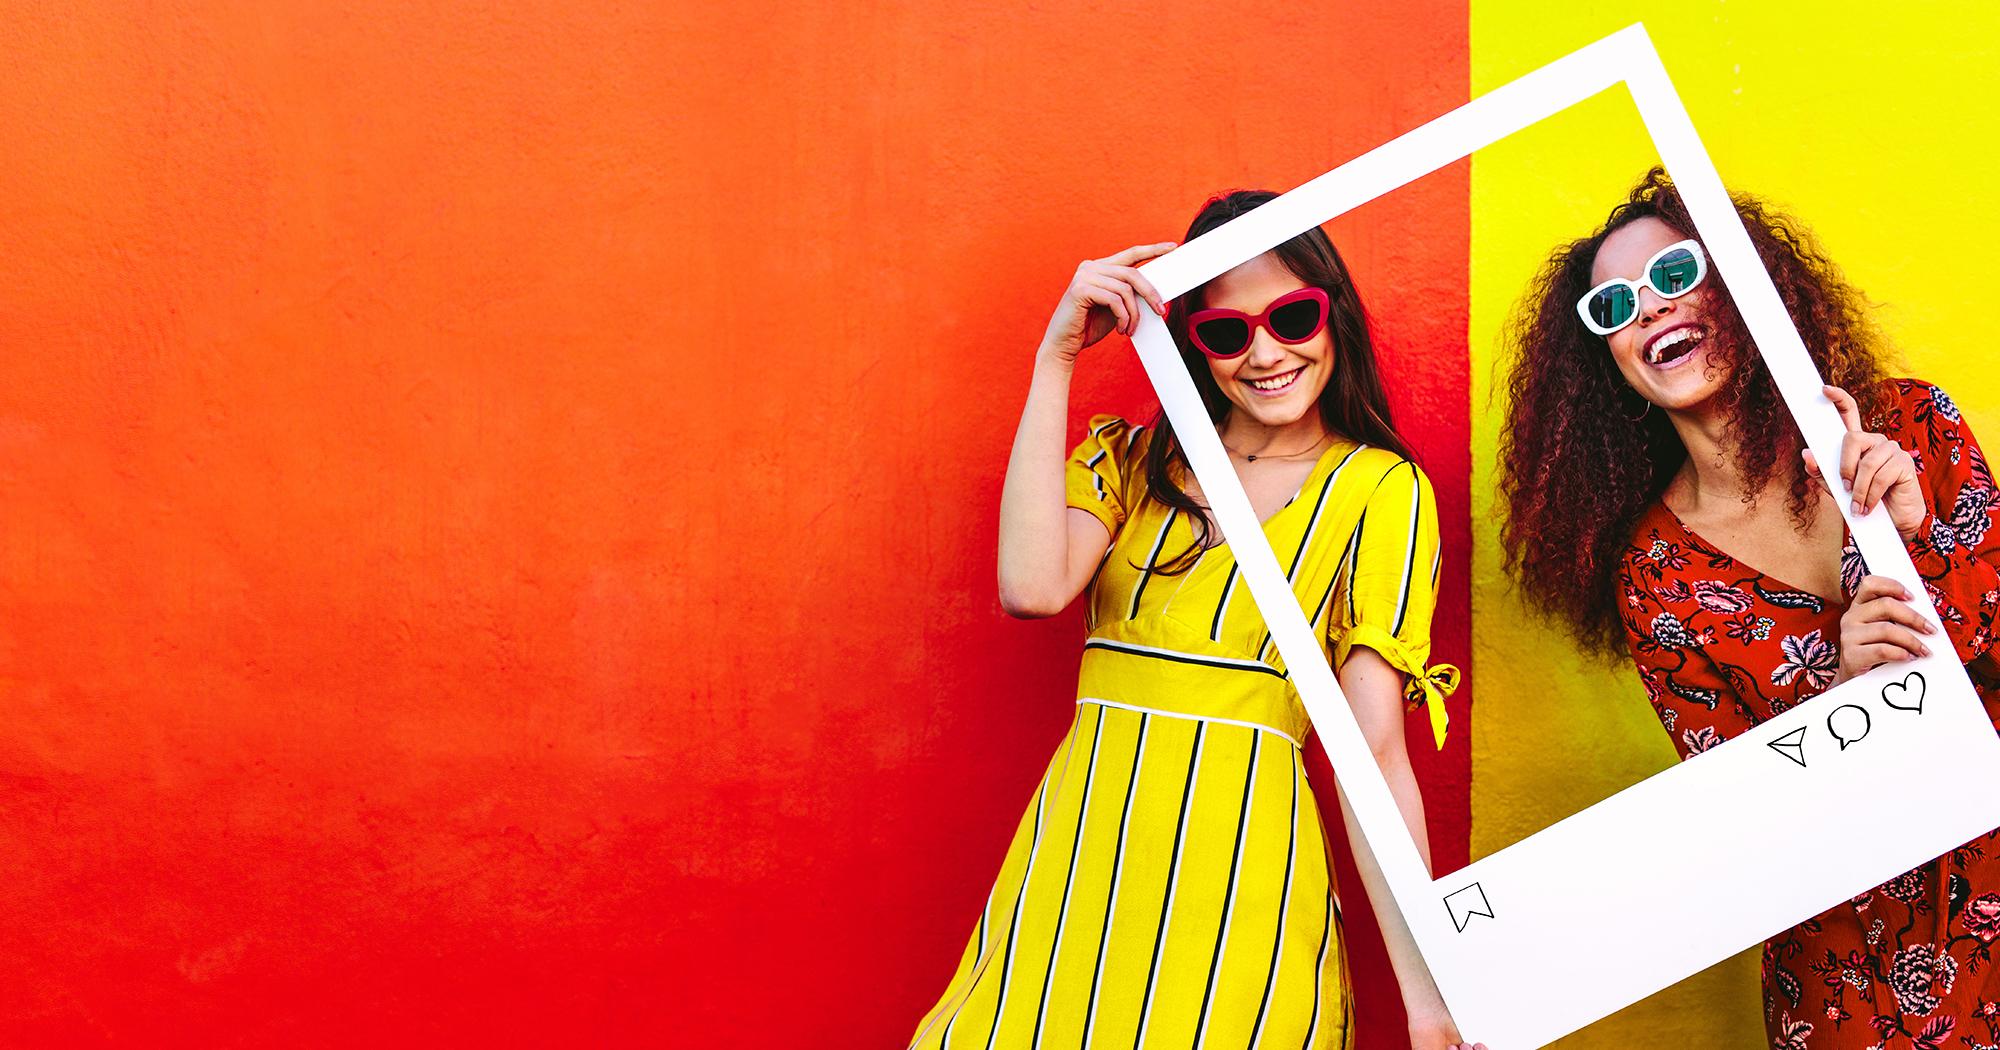 UGC Examples: 7 Brands Driving Sales with User-Generated Content